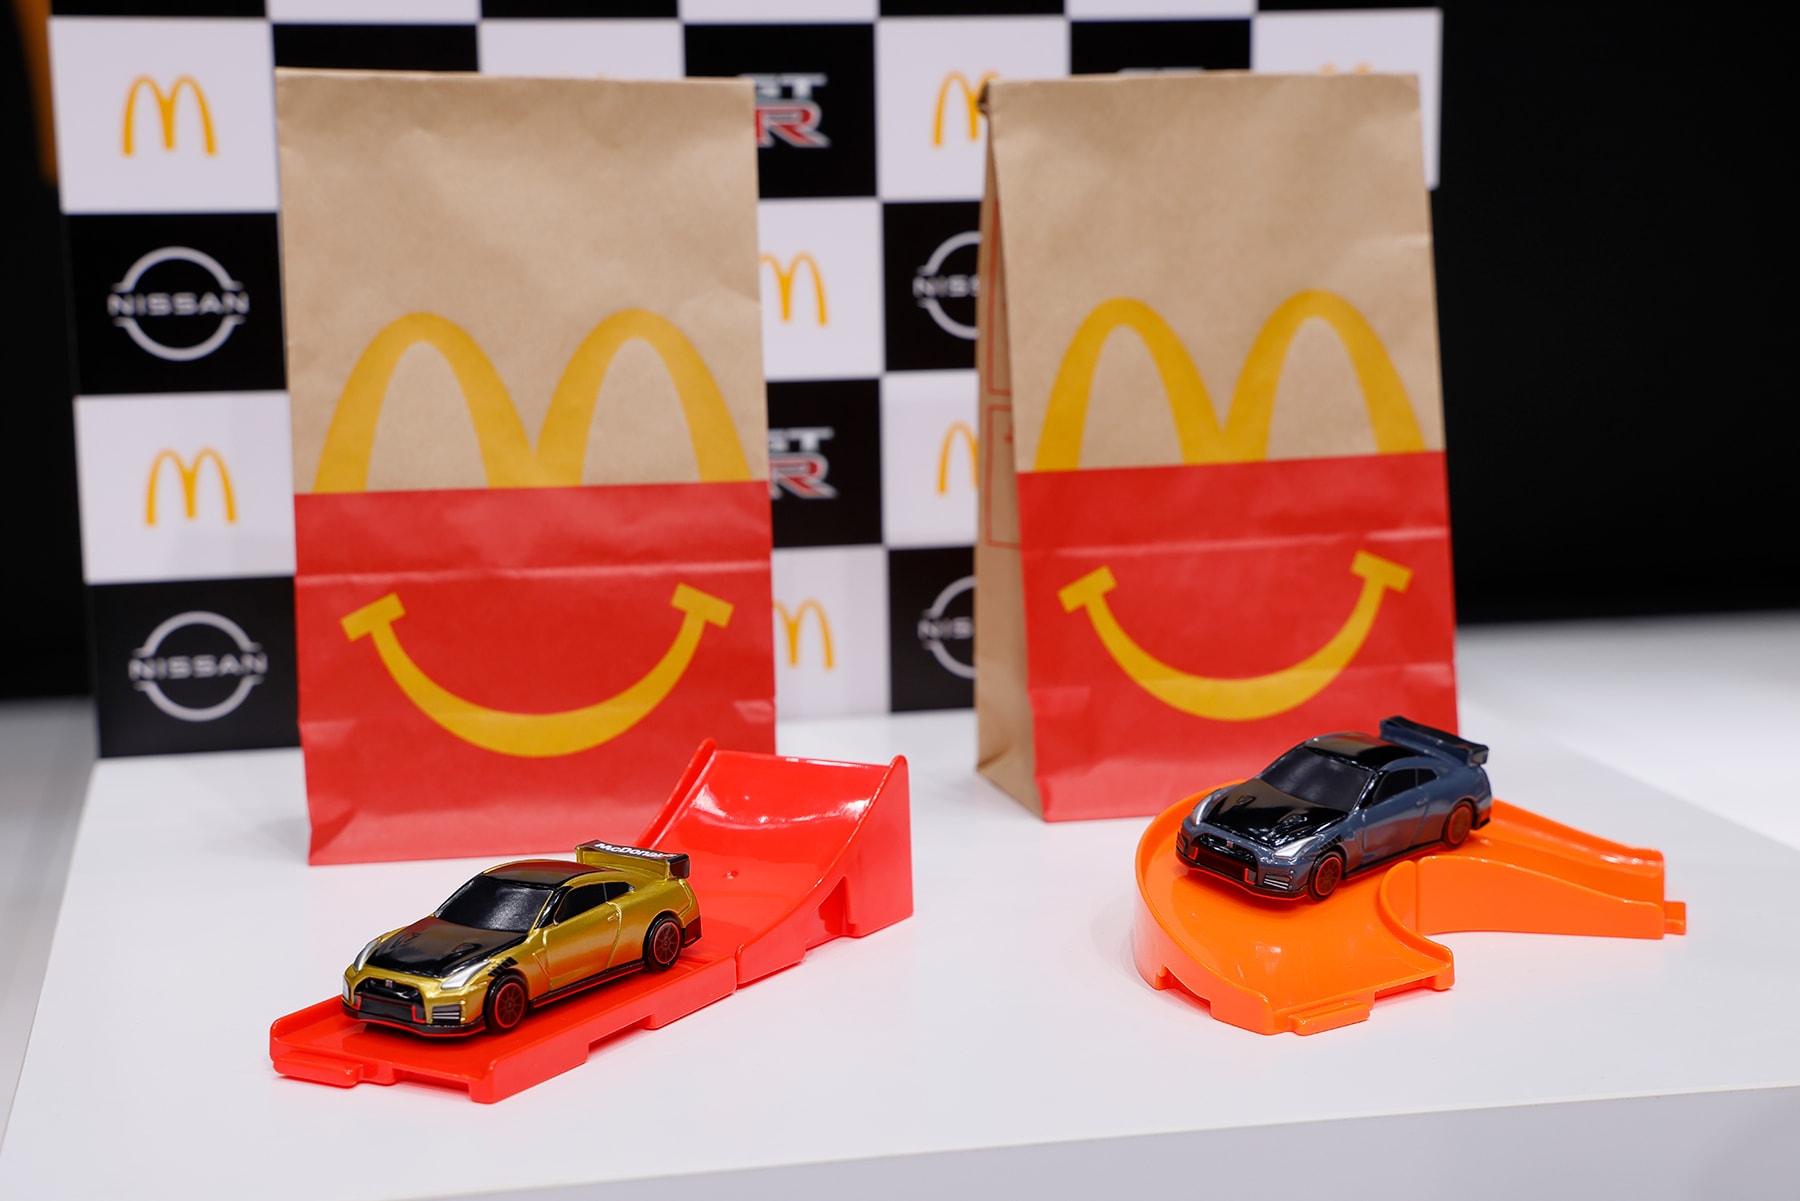 Nissan GT-R NISMO Tomica McDonalds Happy meal Set toy golden arches super cars happy meal Japan toys die-cast cars hot wheels nismo